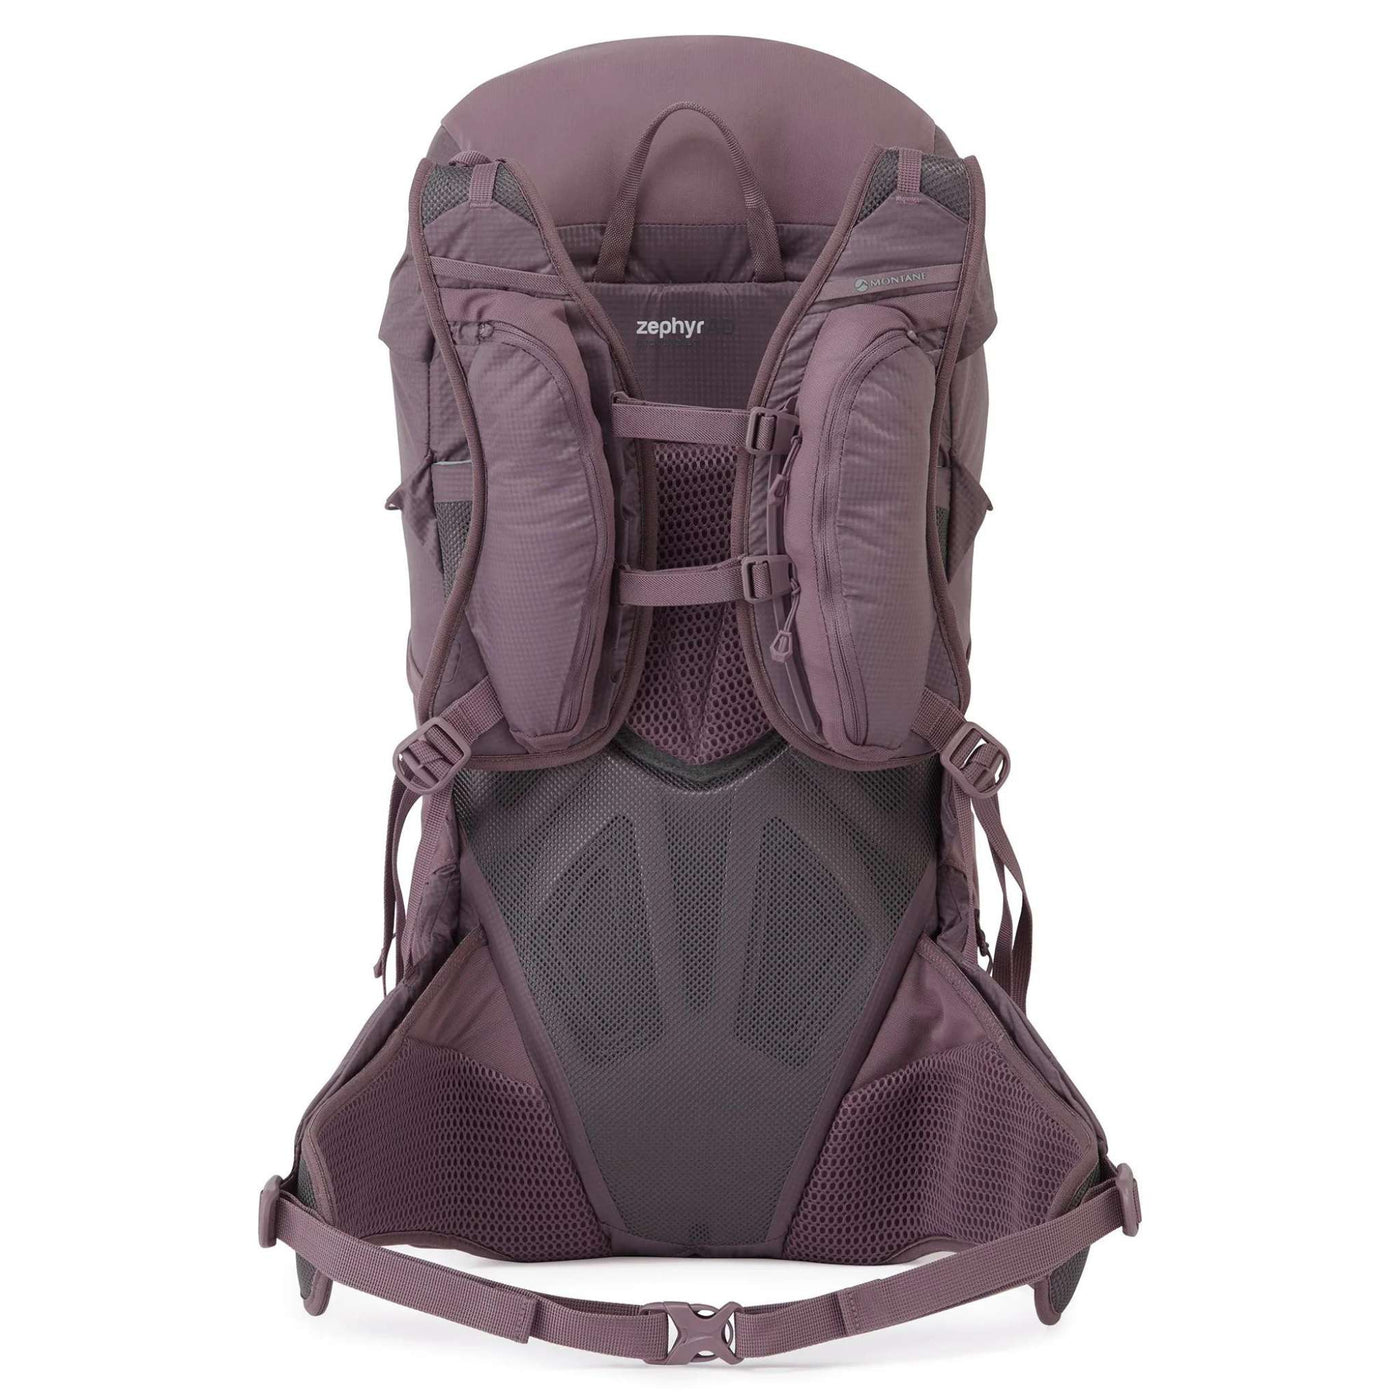 Montane Trailblazer 30 - Womens | Trail Running and Fast Packing Pack | Further Faster Christchurch NZ | #moonscape